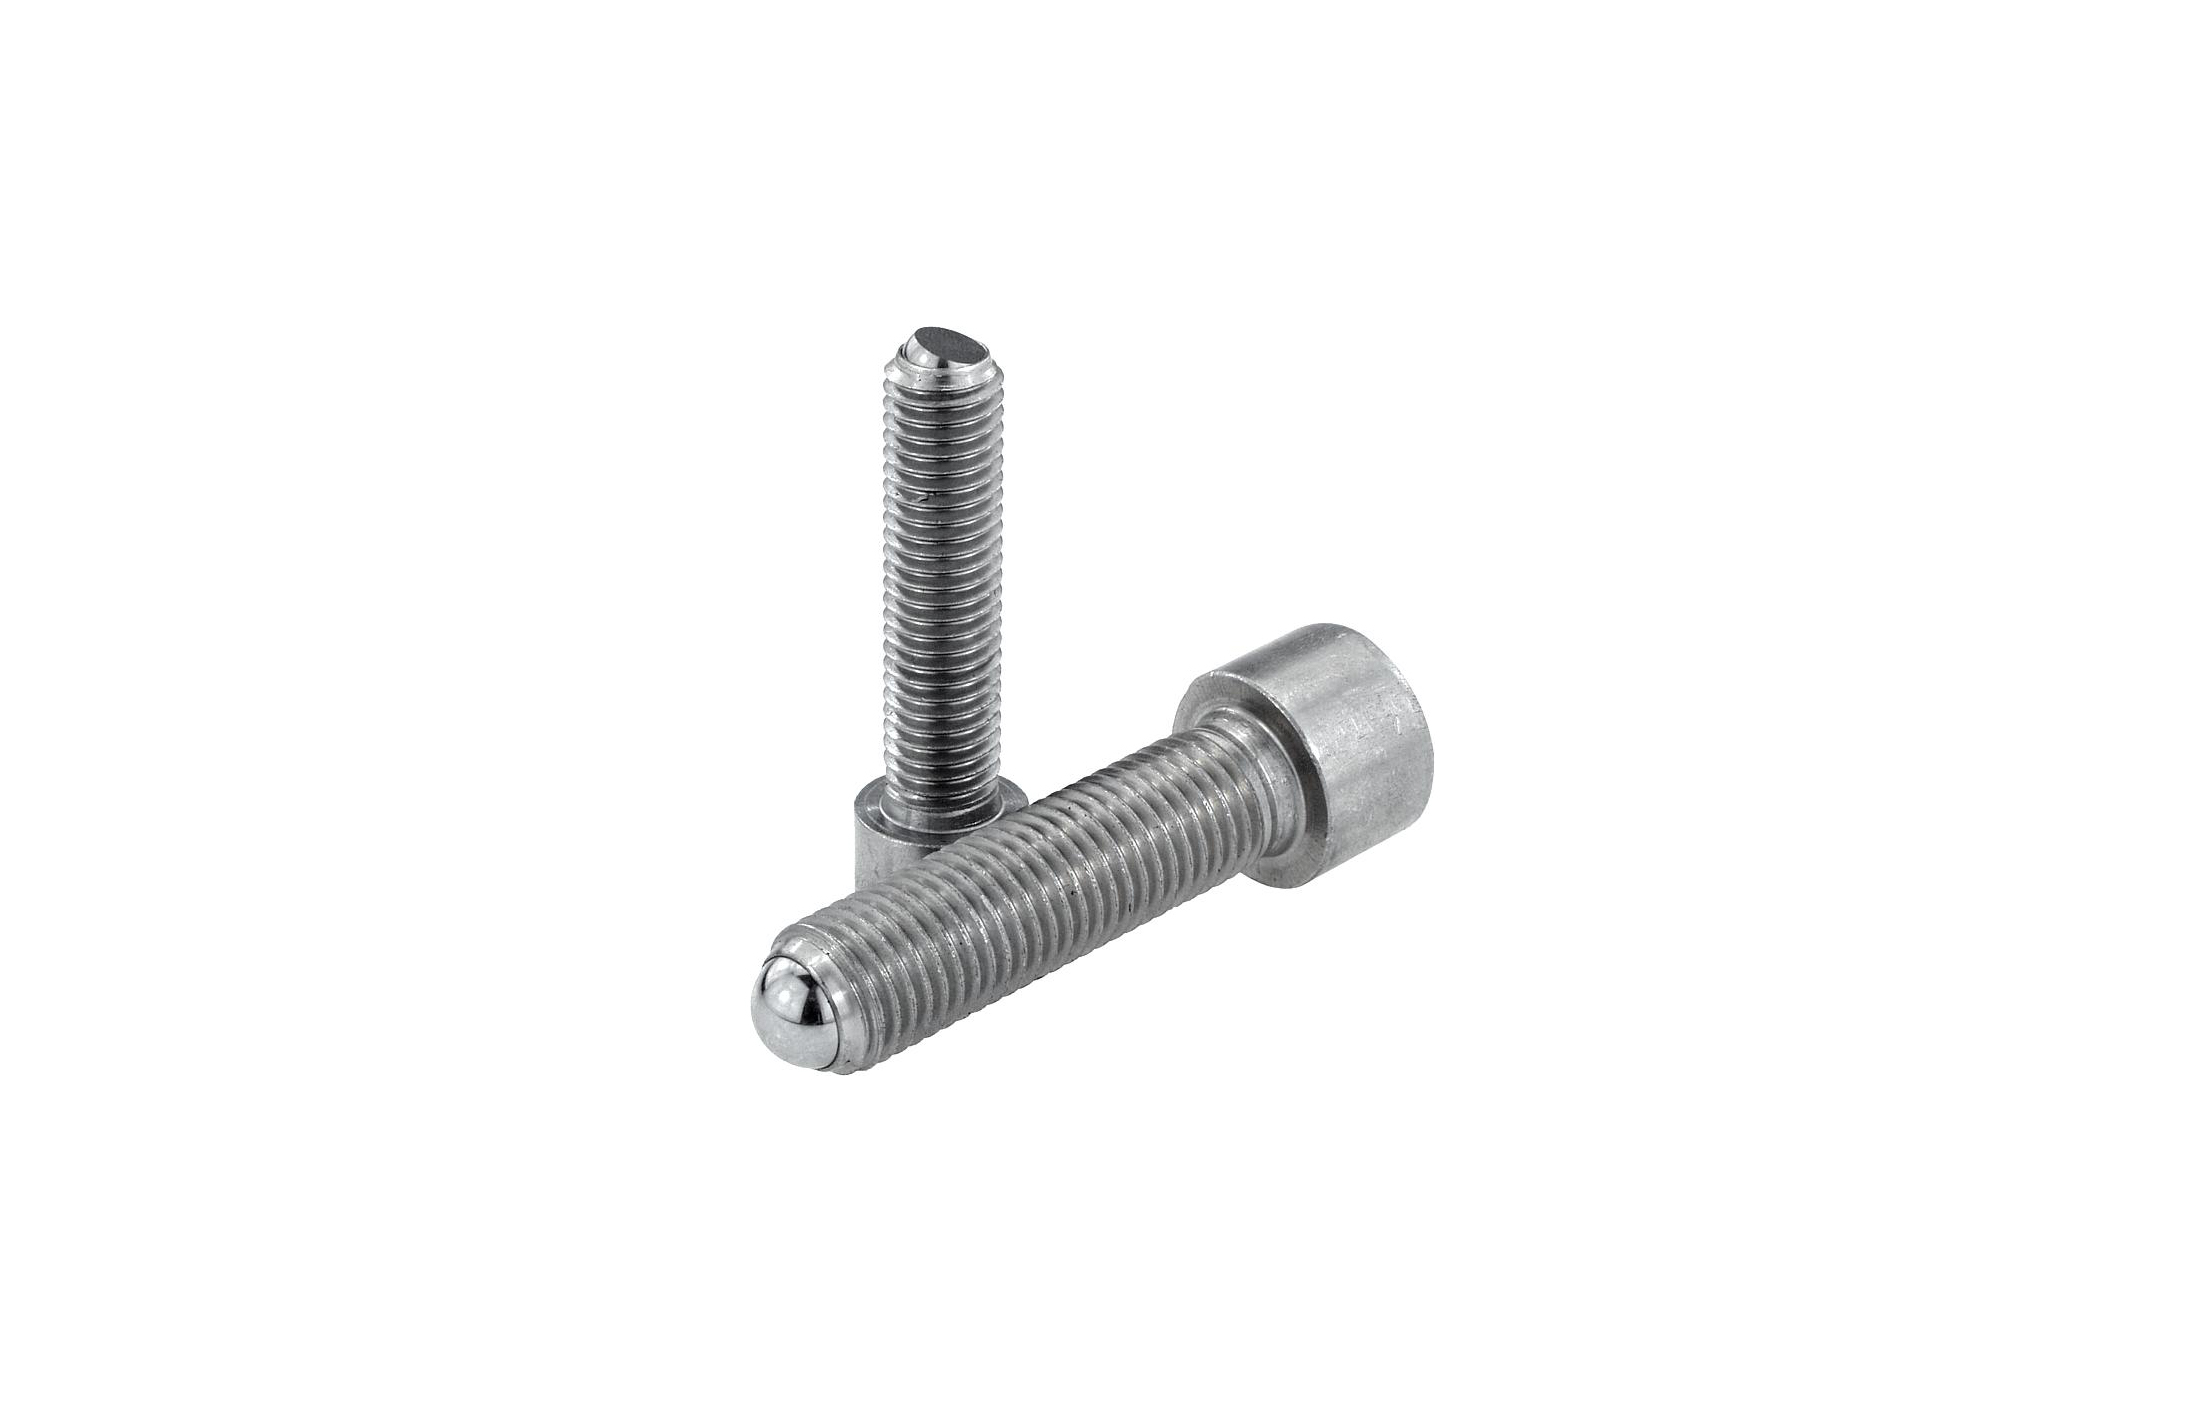 K0381 Ball-end thrust screws with head stainless steel